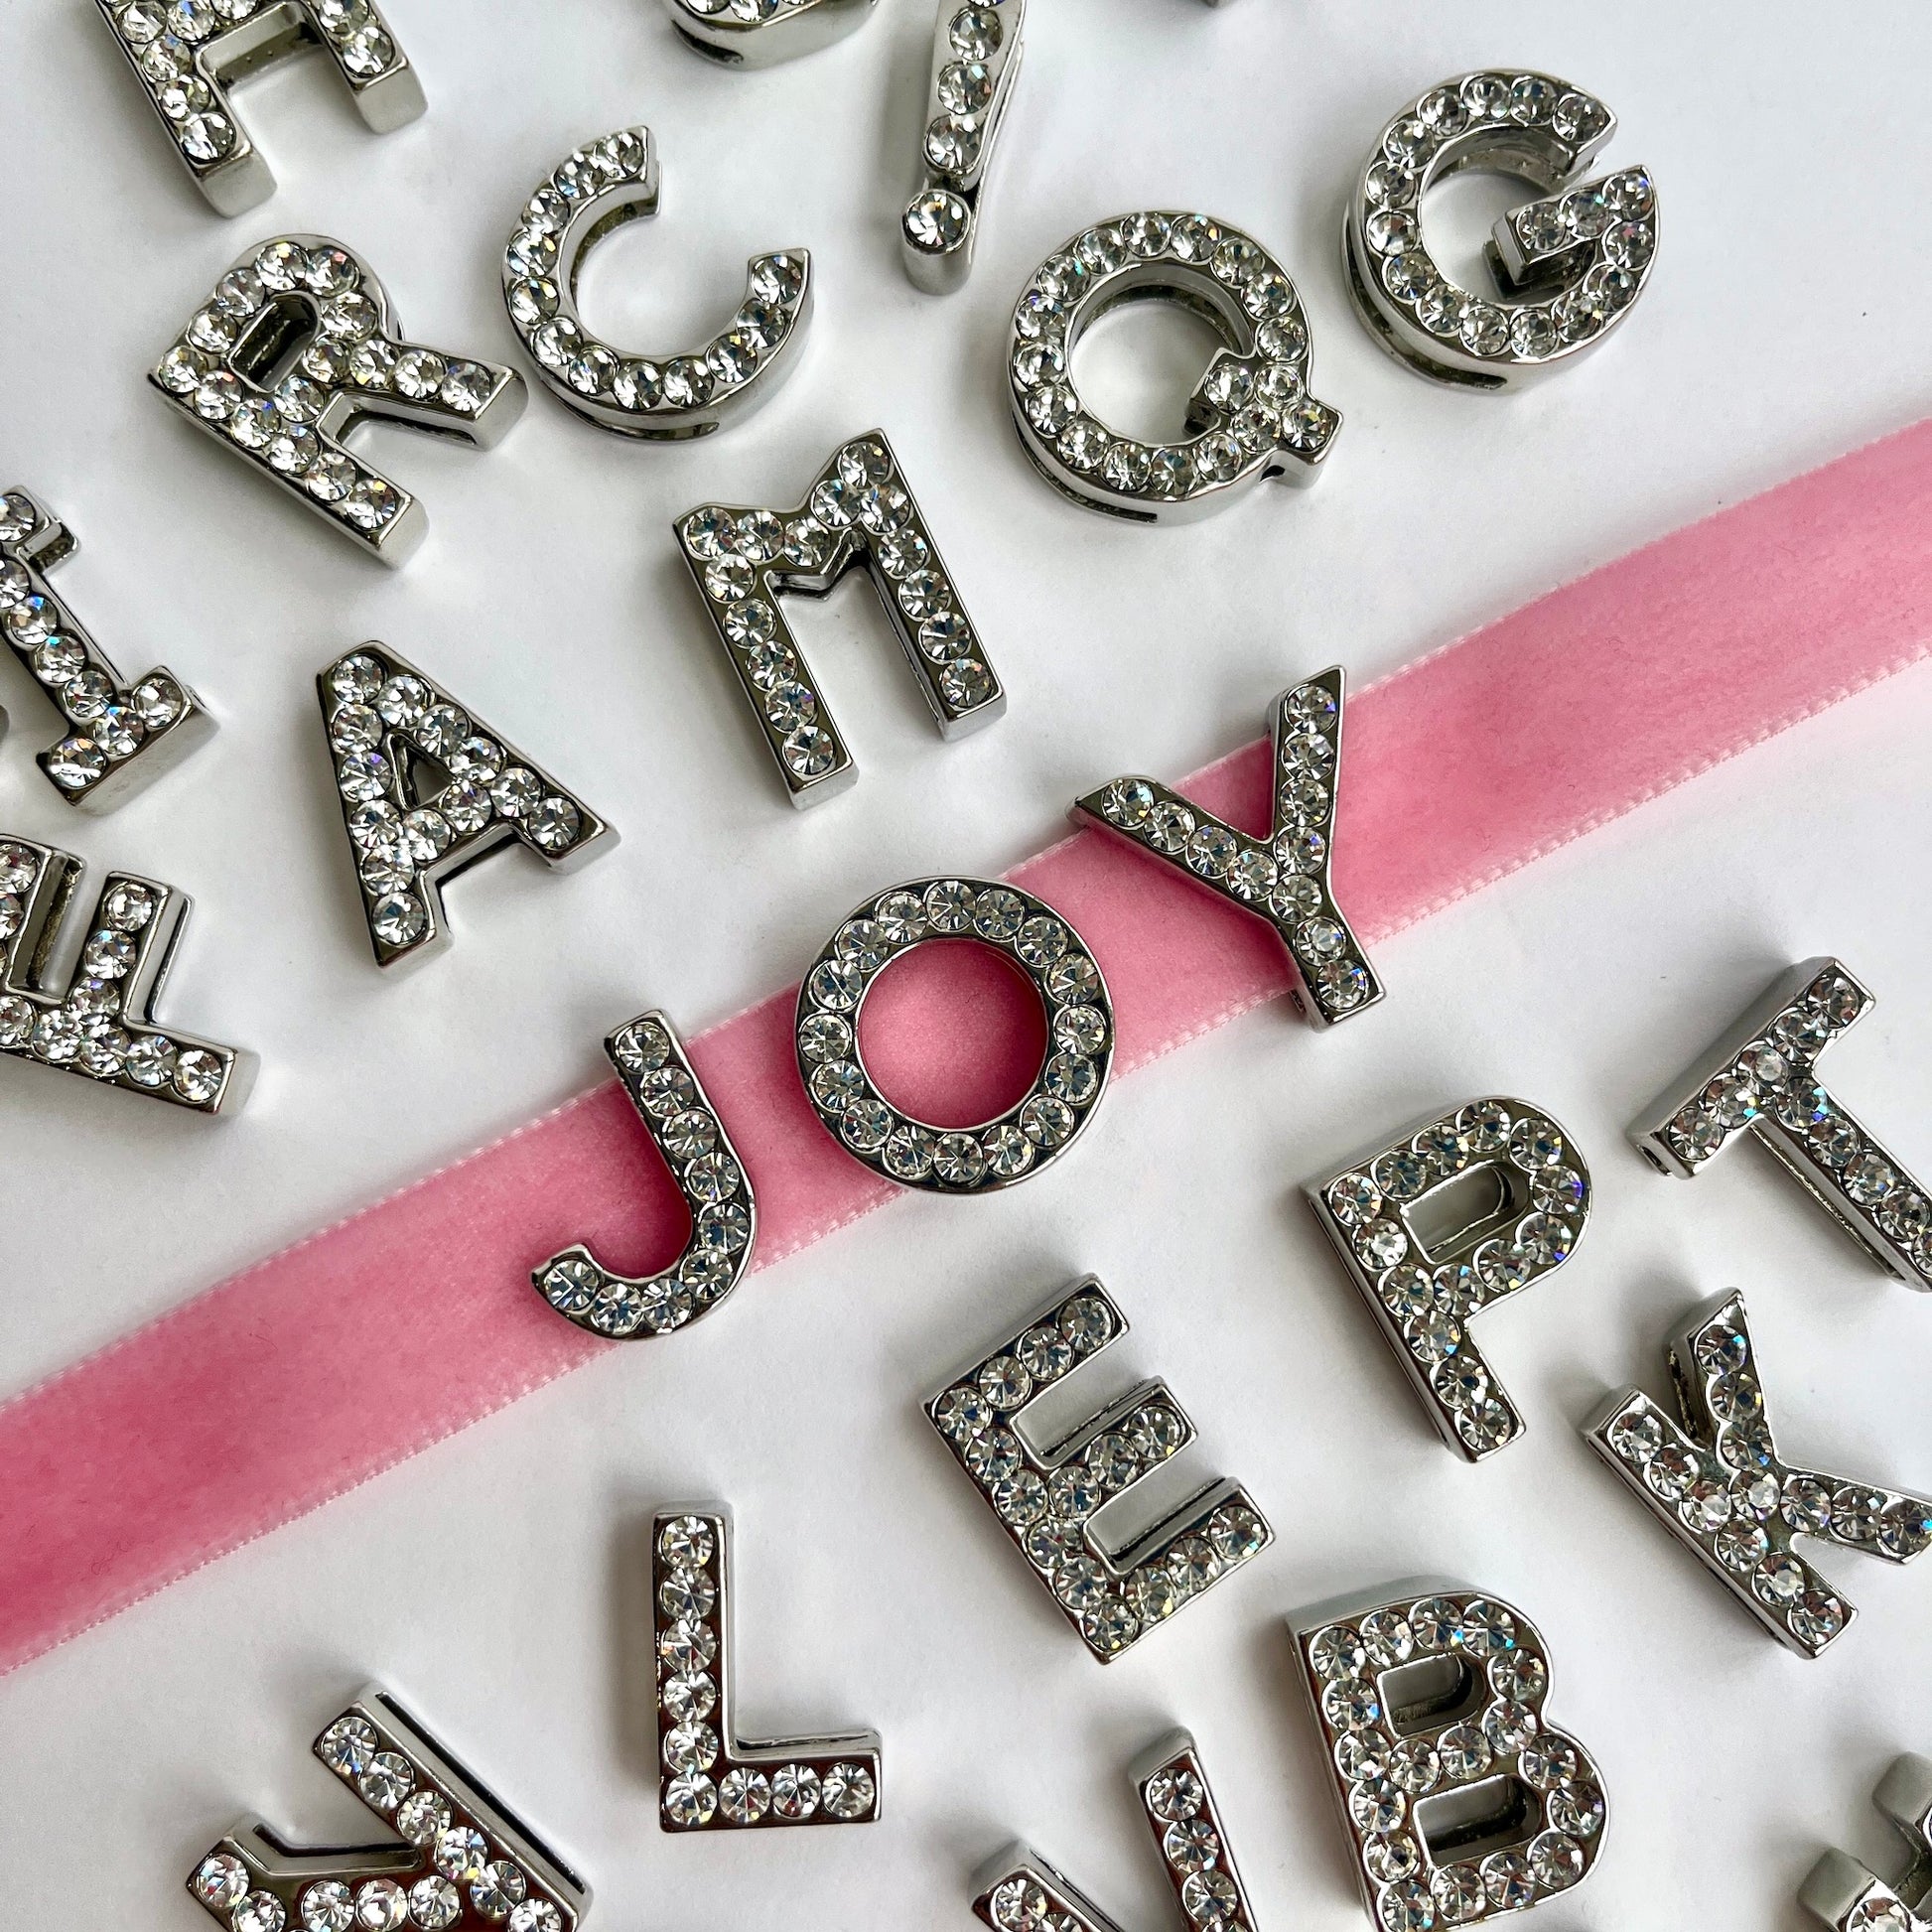 20mm diamante crystal alphabet letters and symbols-KLEINS-DEADSTOCK-HABERDASHERY